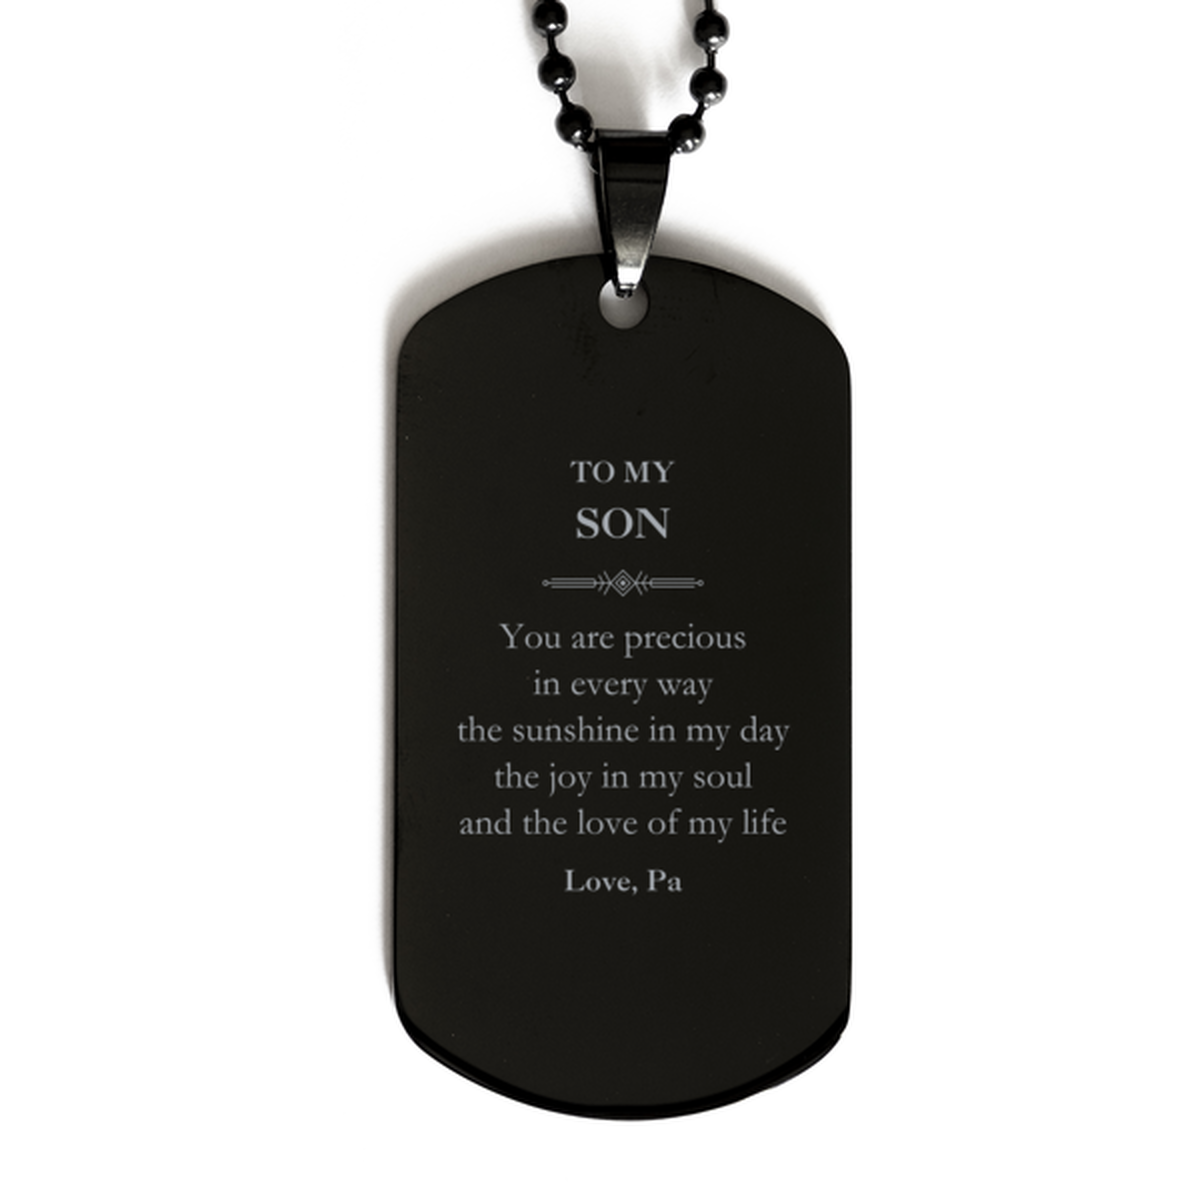 Graduation Gifts for Son Black Dog Tag Present from Pa, Christmas Son Birthday Gifts Son You are precious in every way the sunshine in my day. Love, Pa